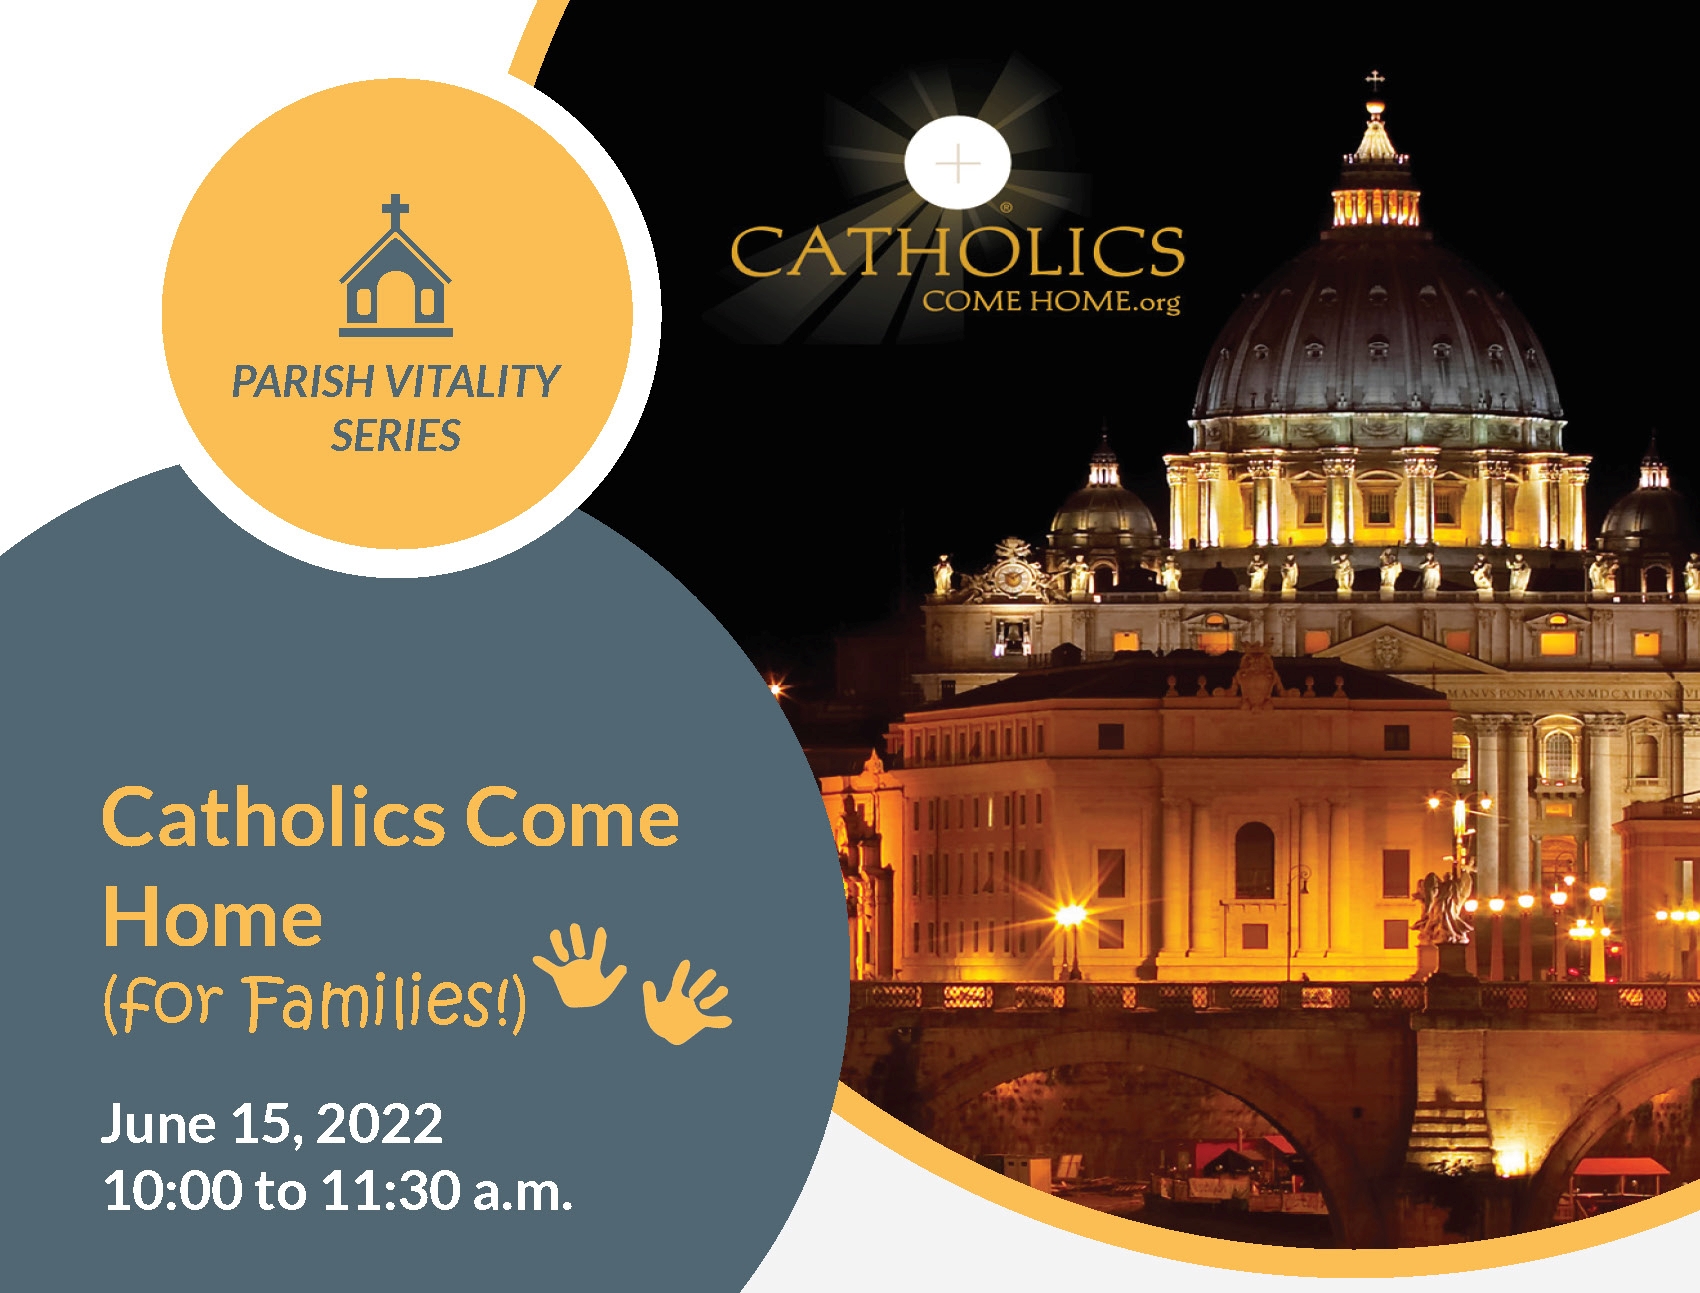 Catholics Come Home logo and St. Peter's Basilica at night